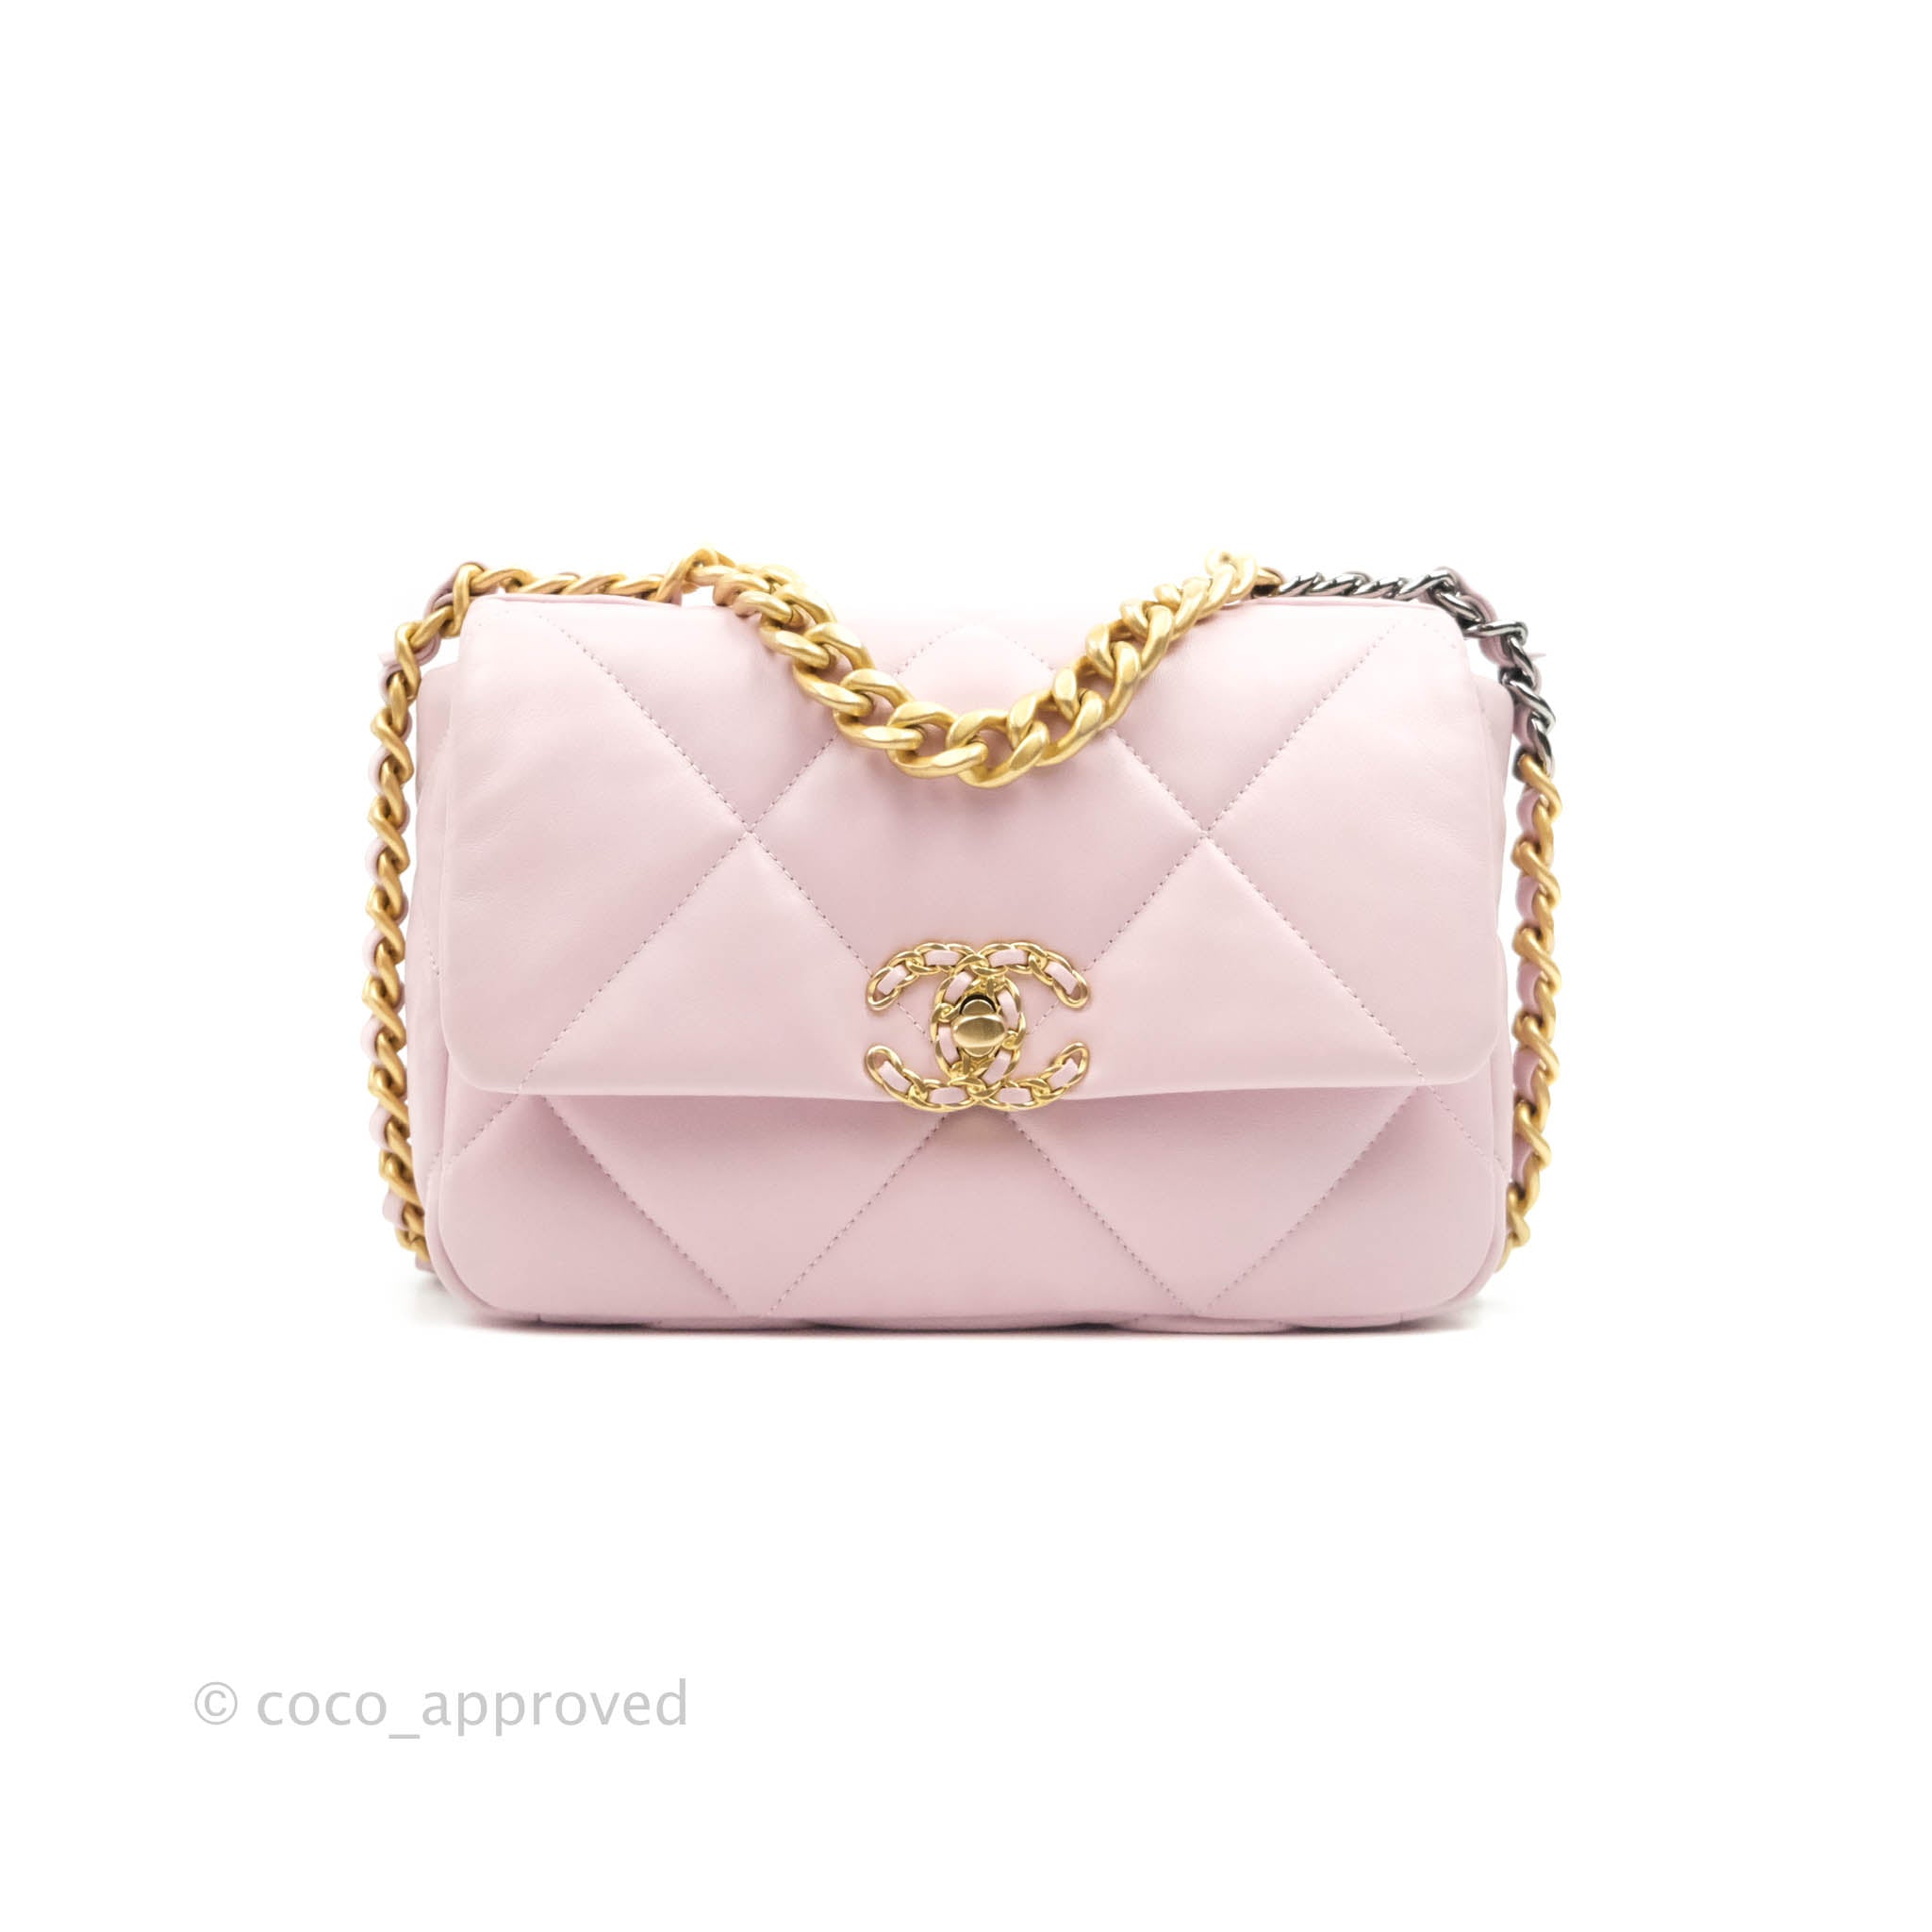 CHANEL Goatskin Quilted Large Chanel 19 Flap Dark Pink